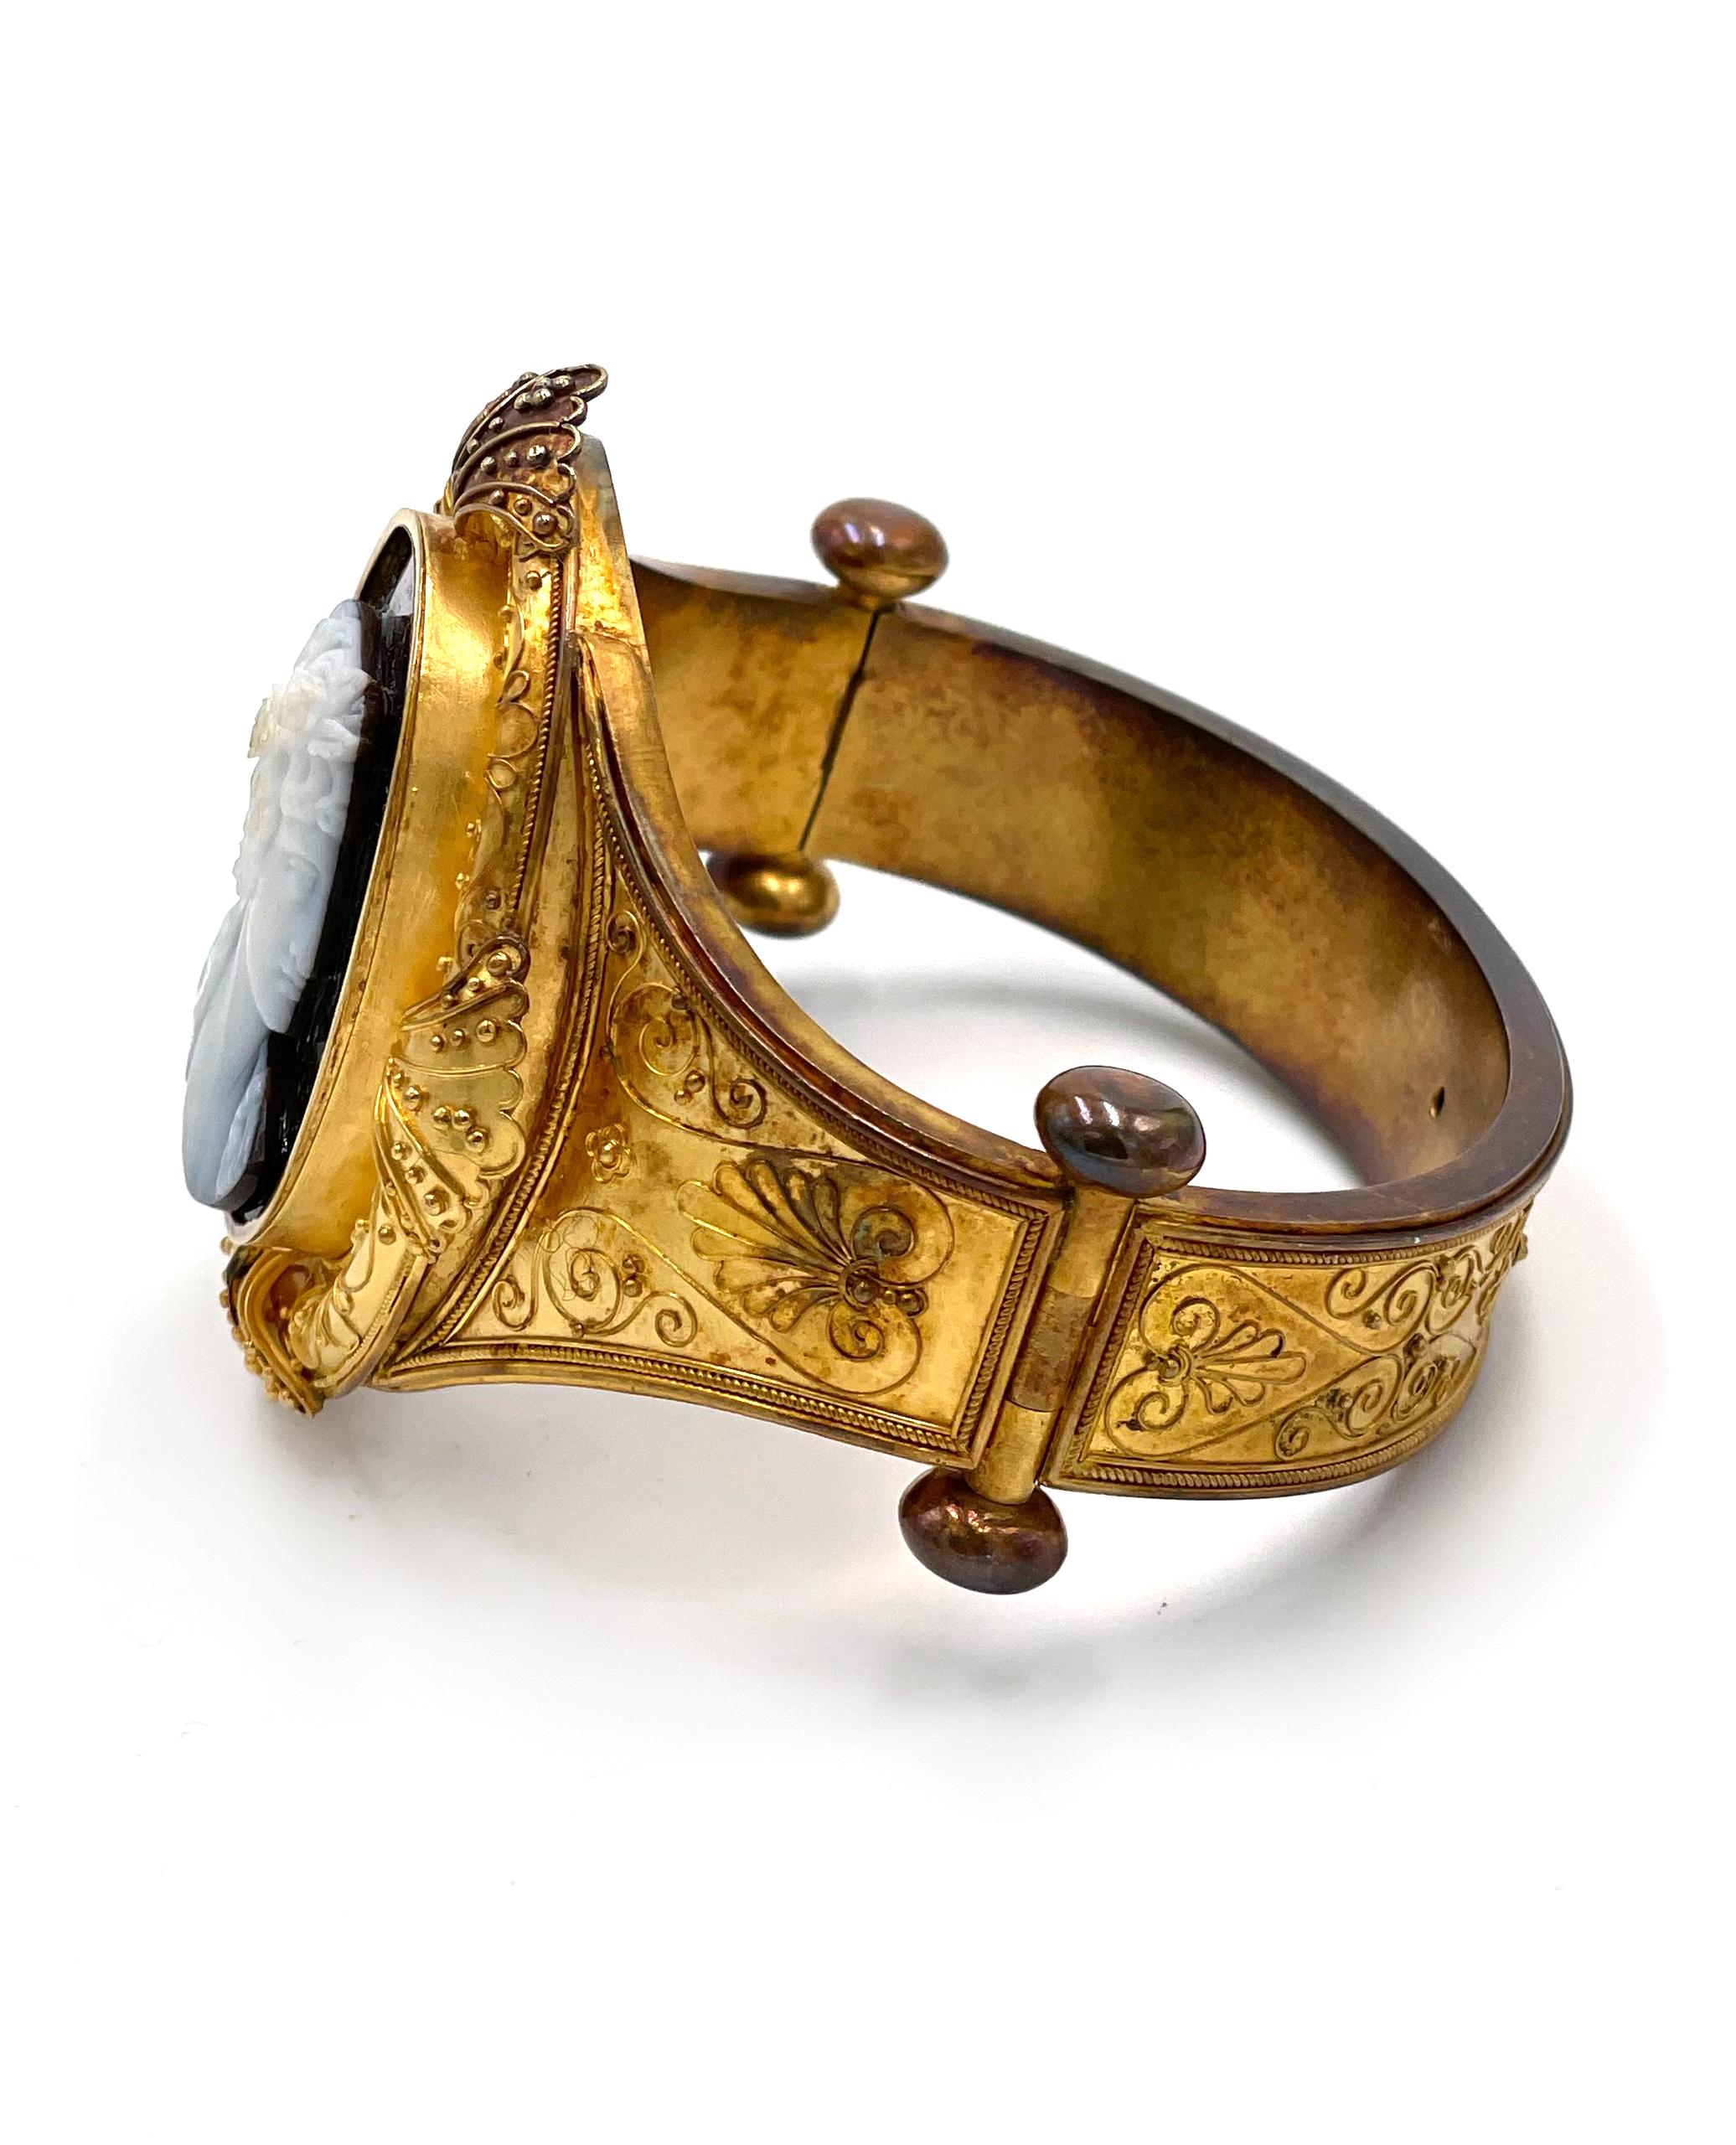 Antique lady's 18K yellow gold hard stone cameo hinged bangle bracelet. The oval cameo measures
33x26mm. The detailed carving depicts a Roman style portrait of a woman.  The stone has a black background and white on the profile. The ornate bracelet